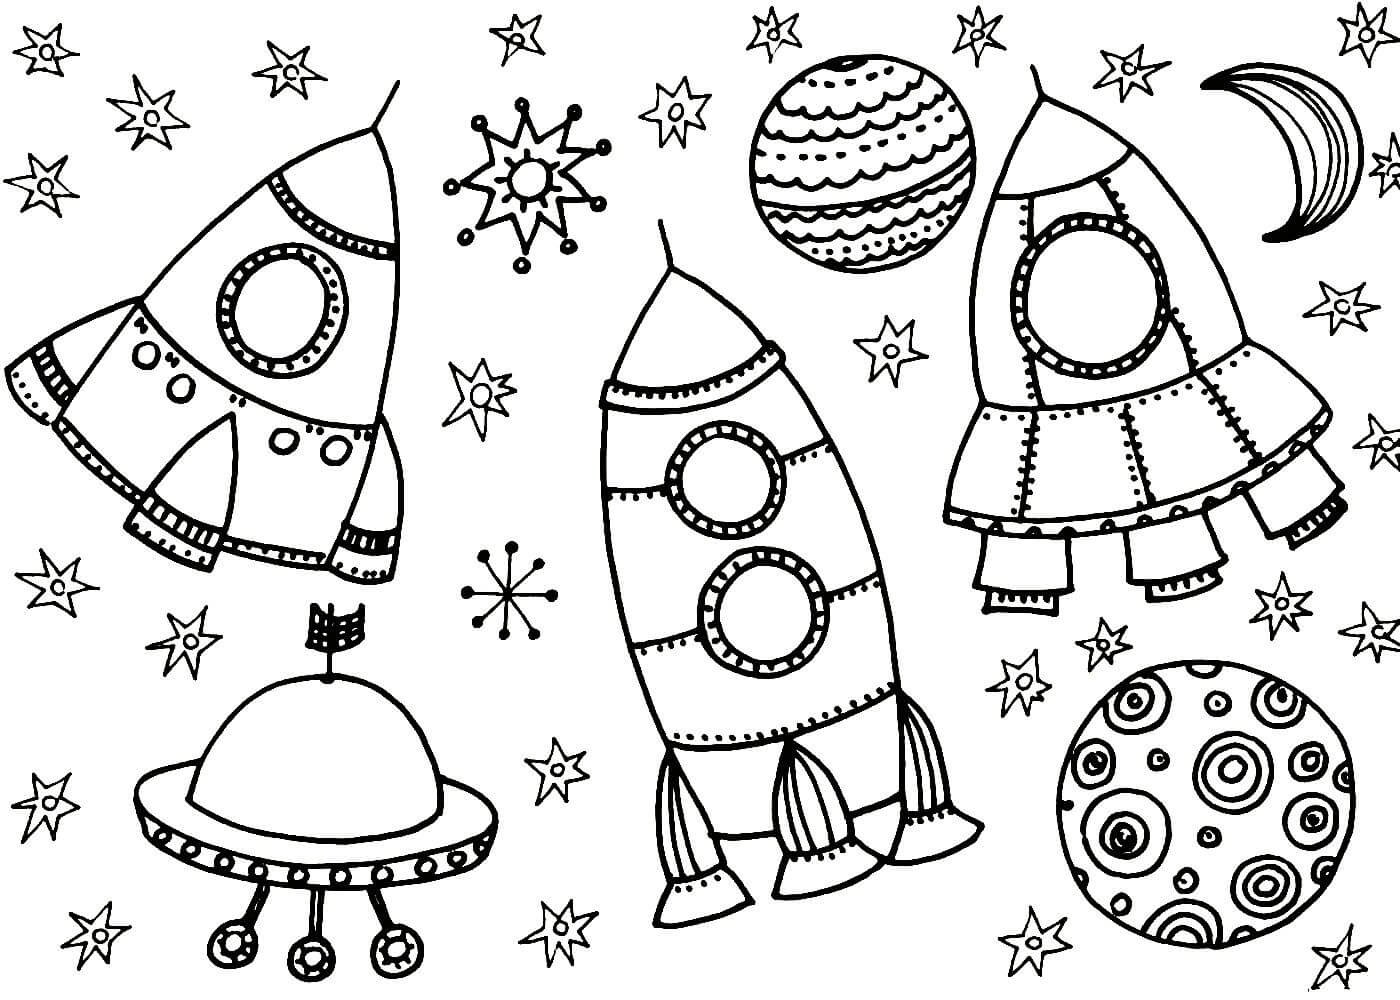 Coloring book incredible space telescope for 4-5 year olds